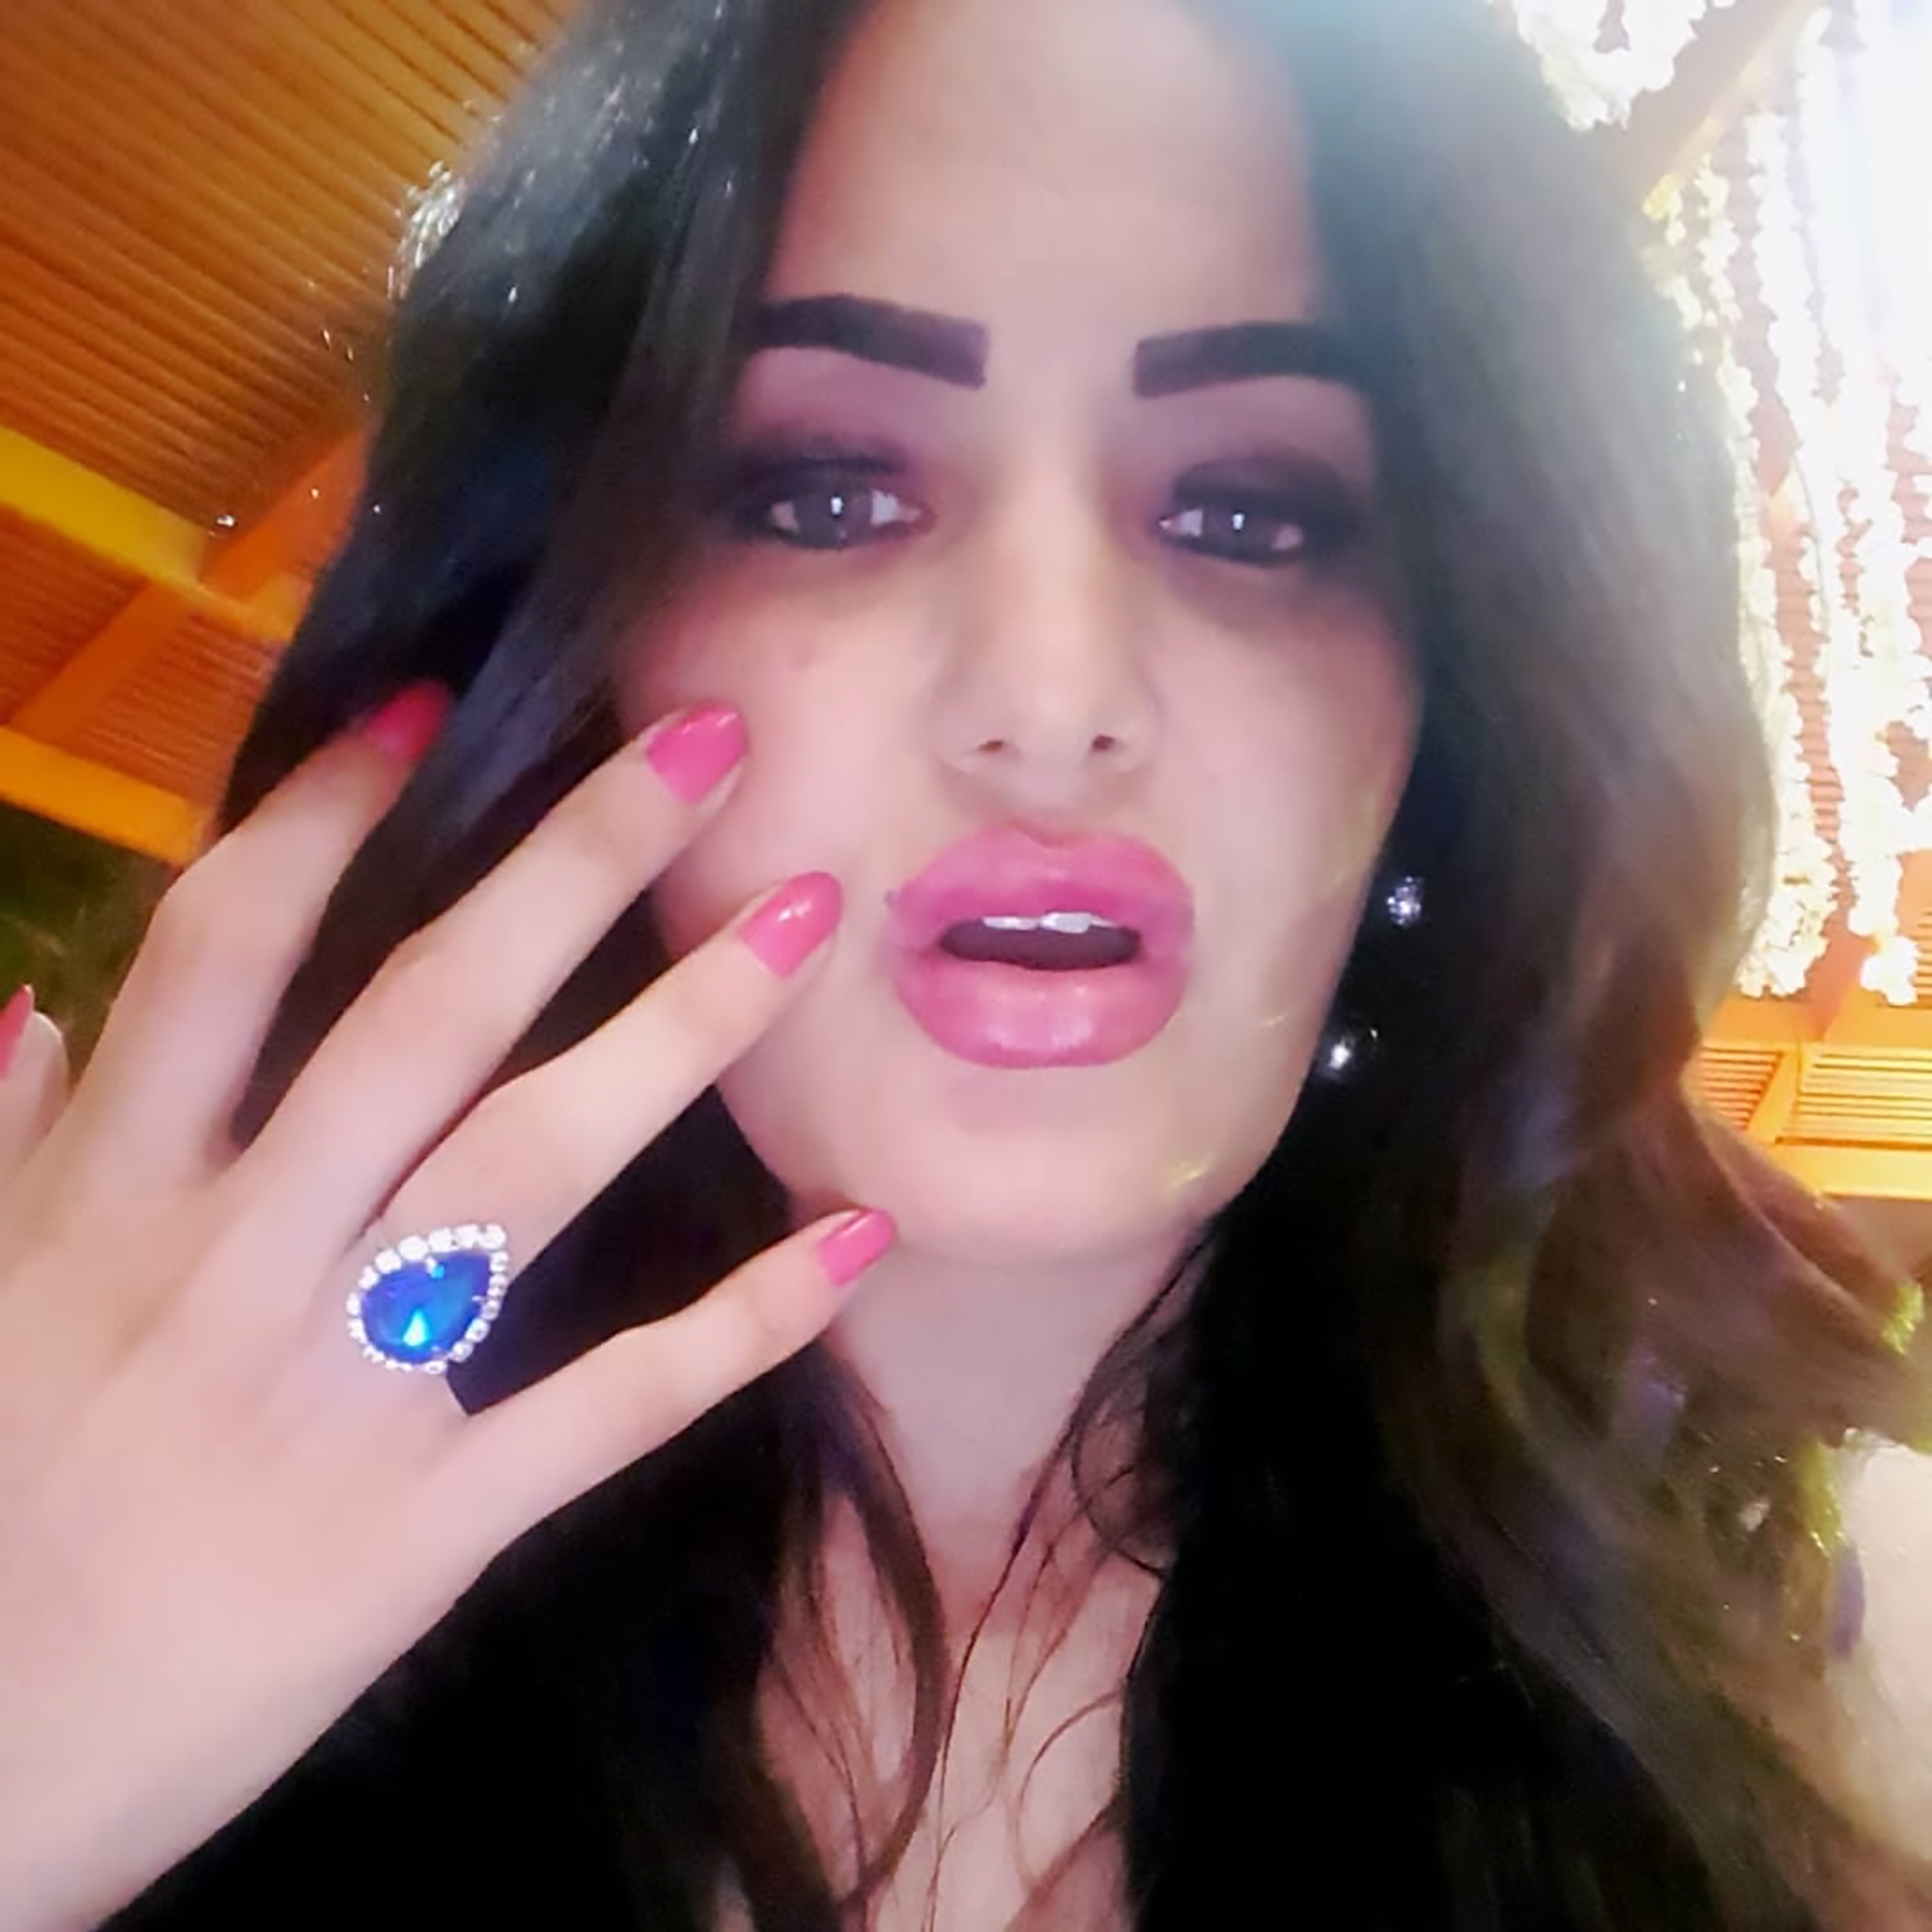 Read more about the article Egypt Belly Dancer Arrested Over Social Media Snaps